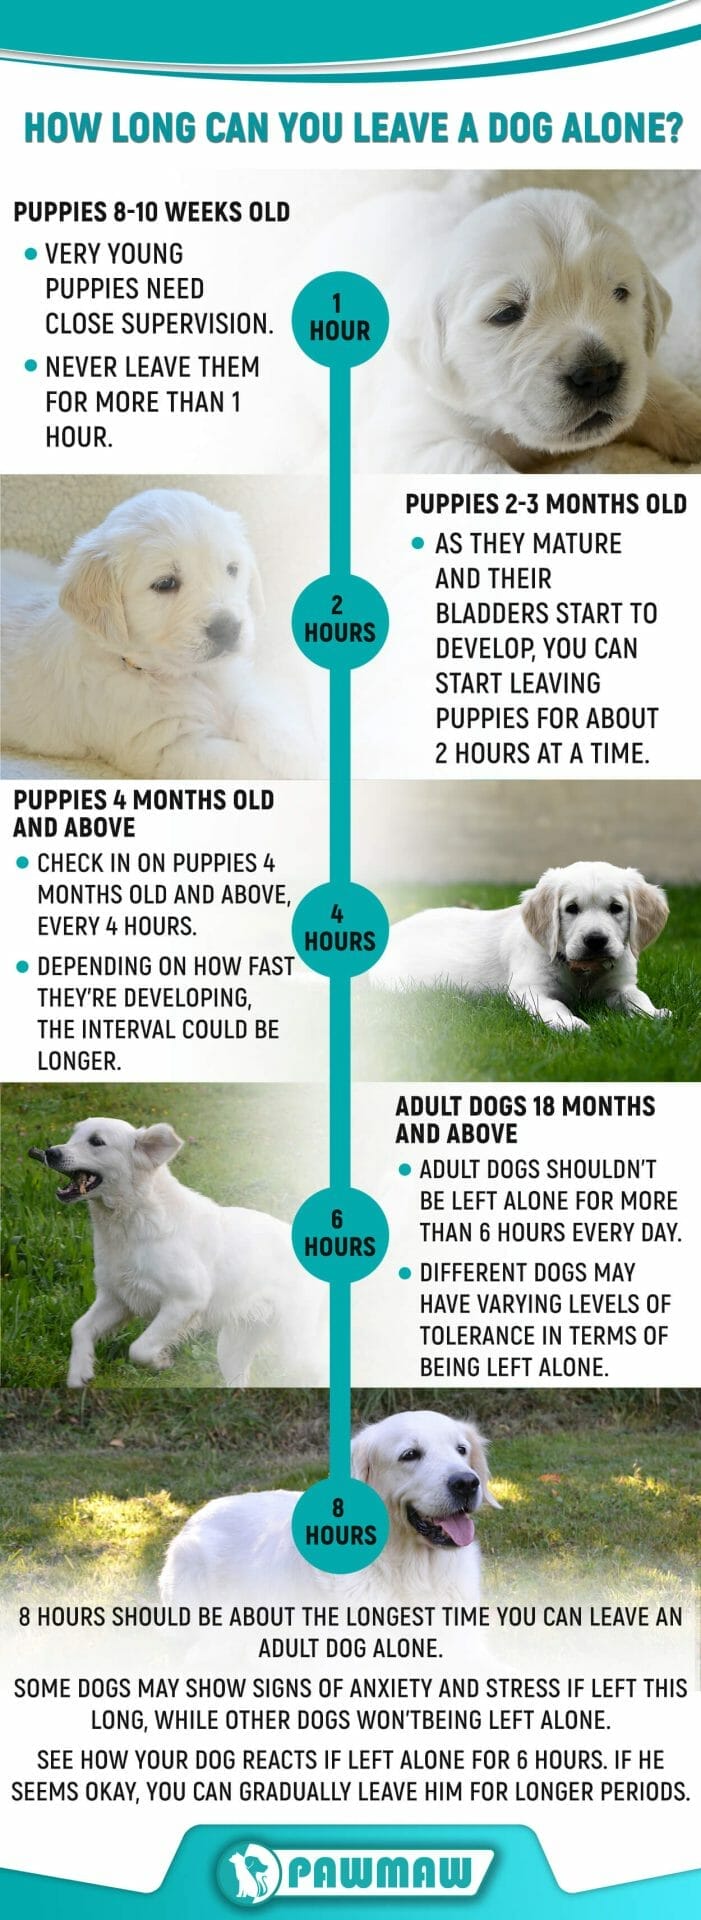 How Long Can You Board a Dog? Important Things to Know